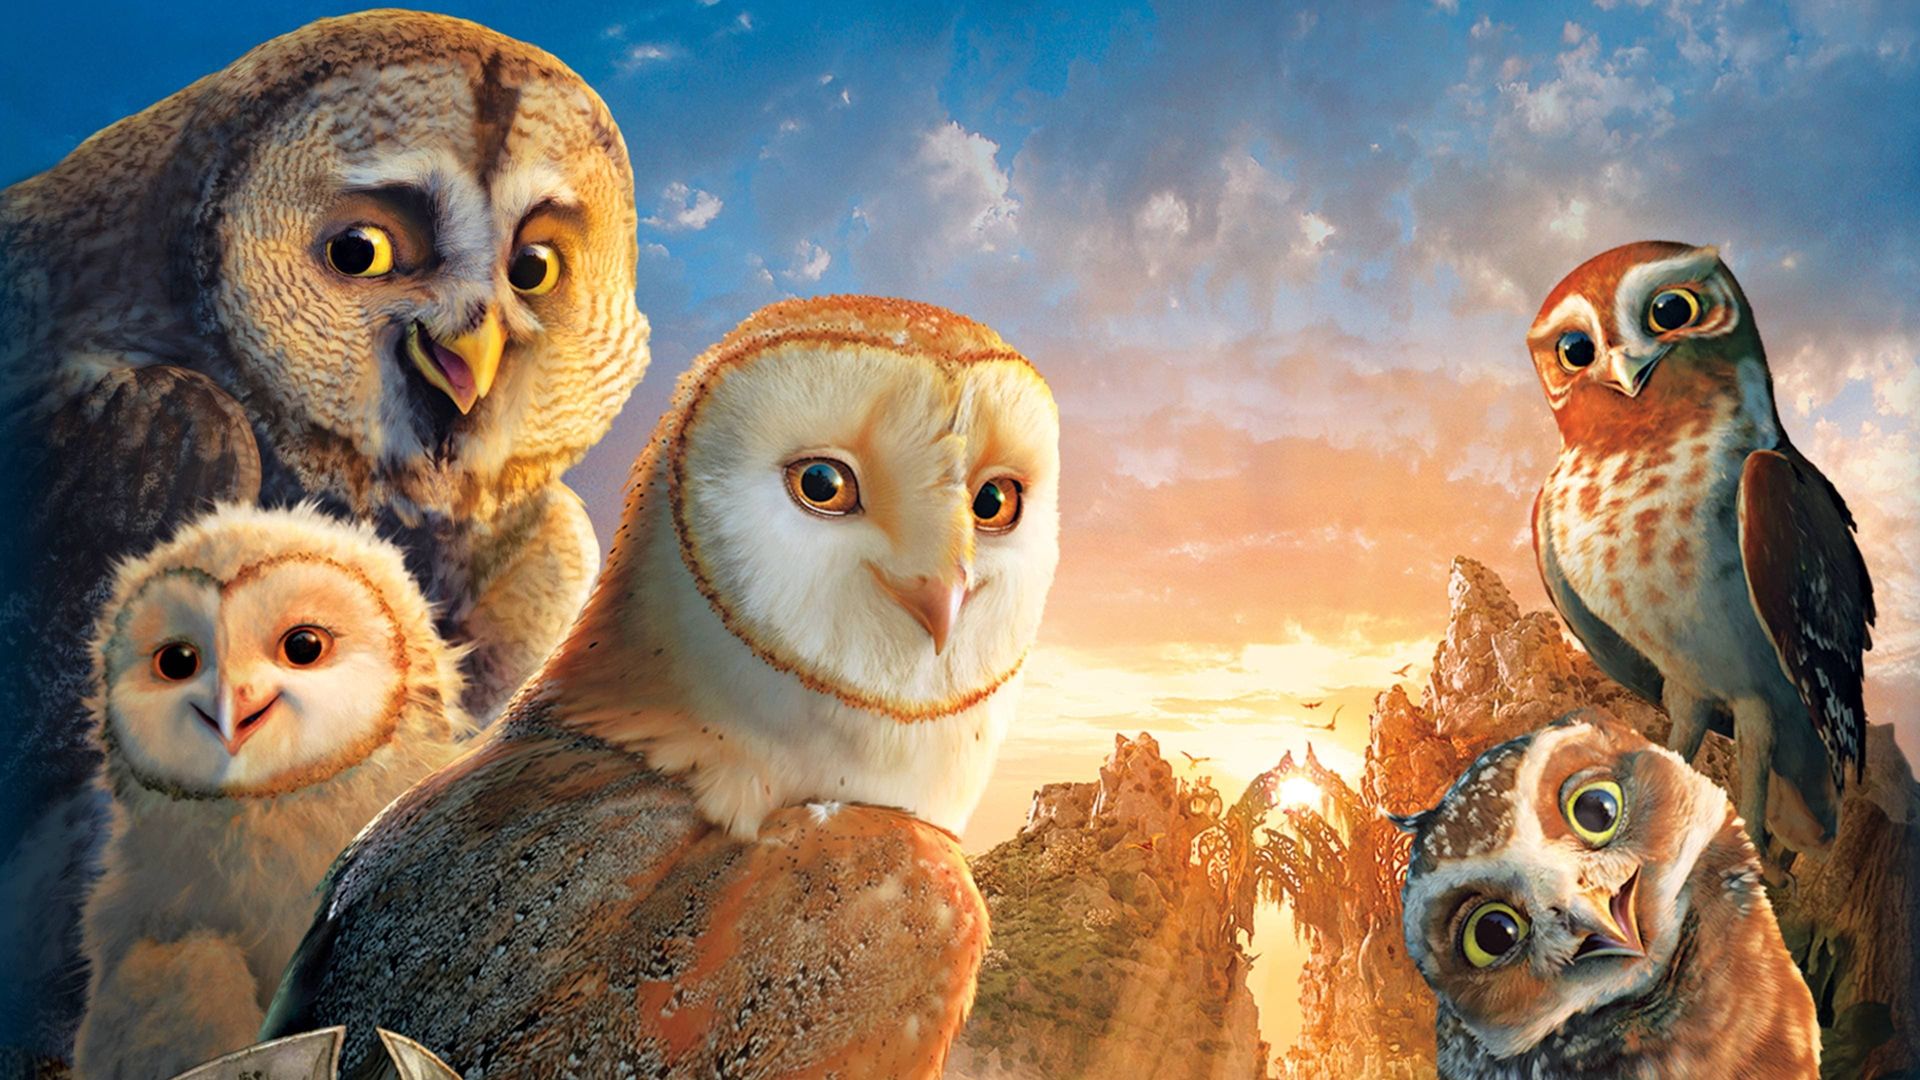 Legend of the Guardians: The Owls of Ga'Hoole Backdrop